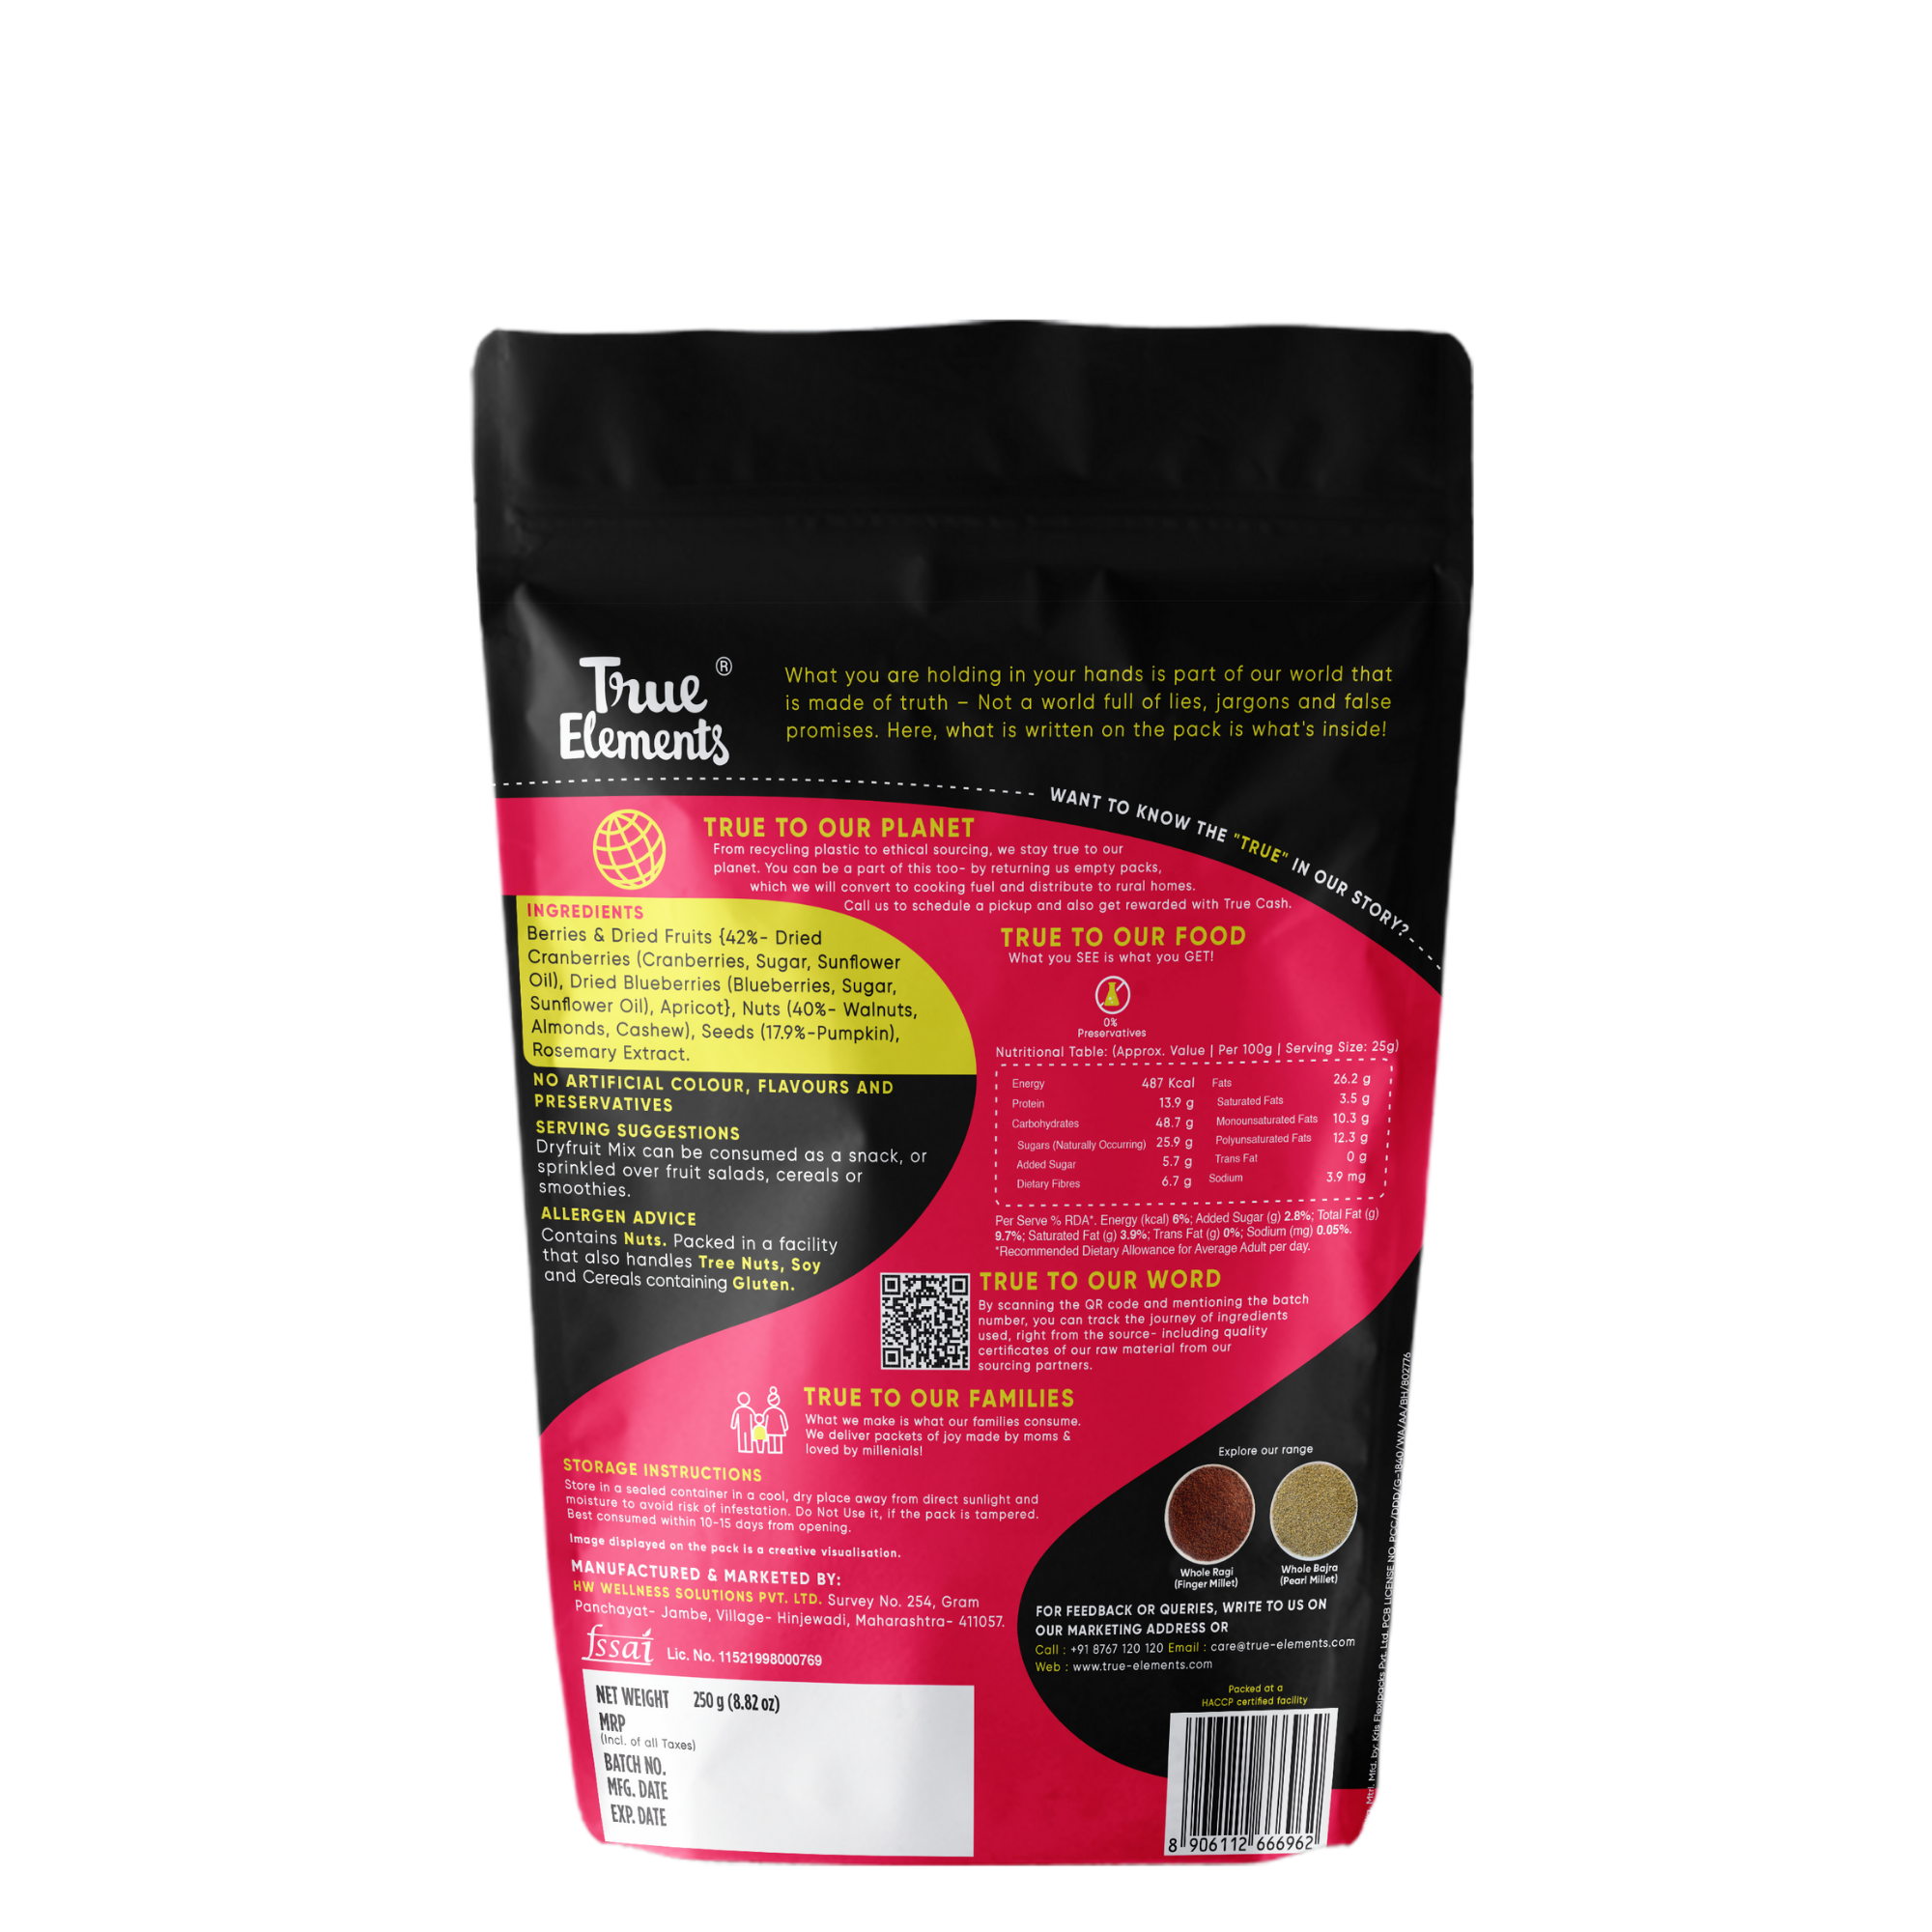 True elements dryfruit mix 500g pack ingredients and nutrients